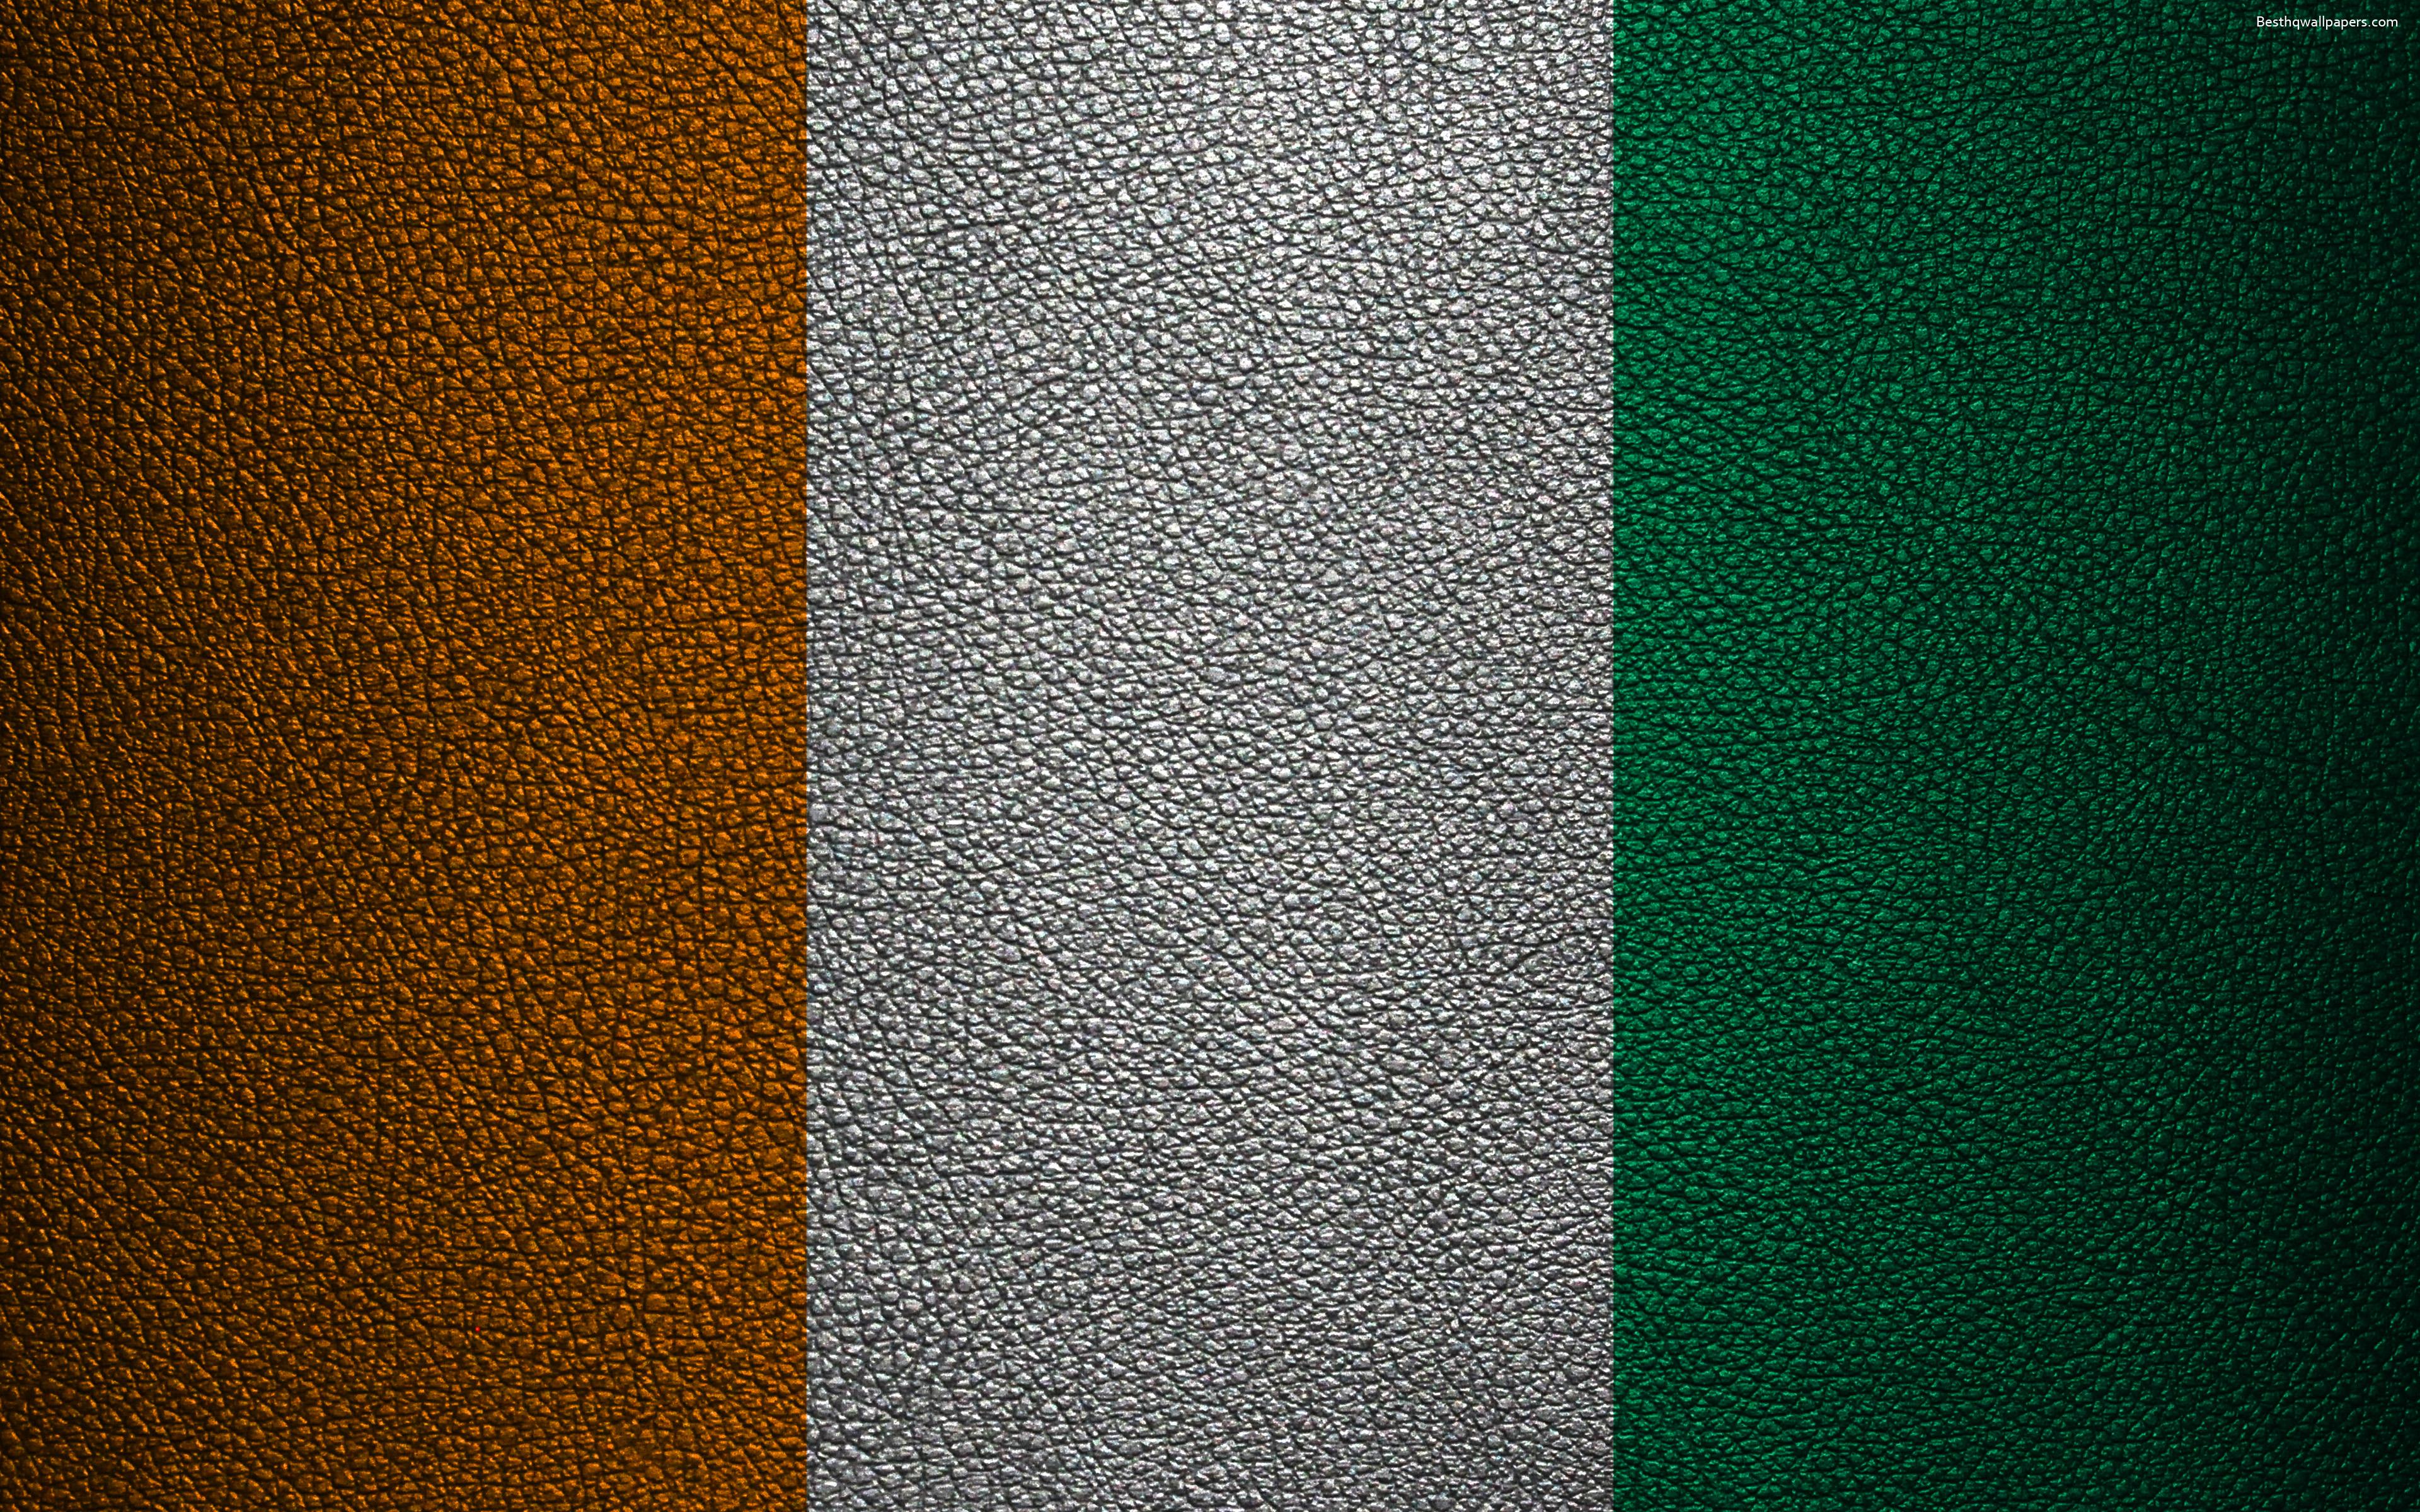 Download wallpaper Flag of Ivory Coast, 4K, leather texture, Africa